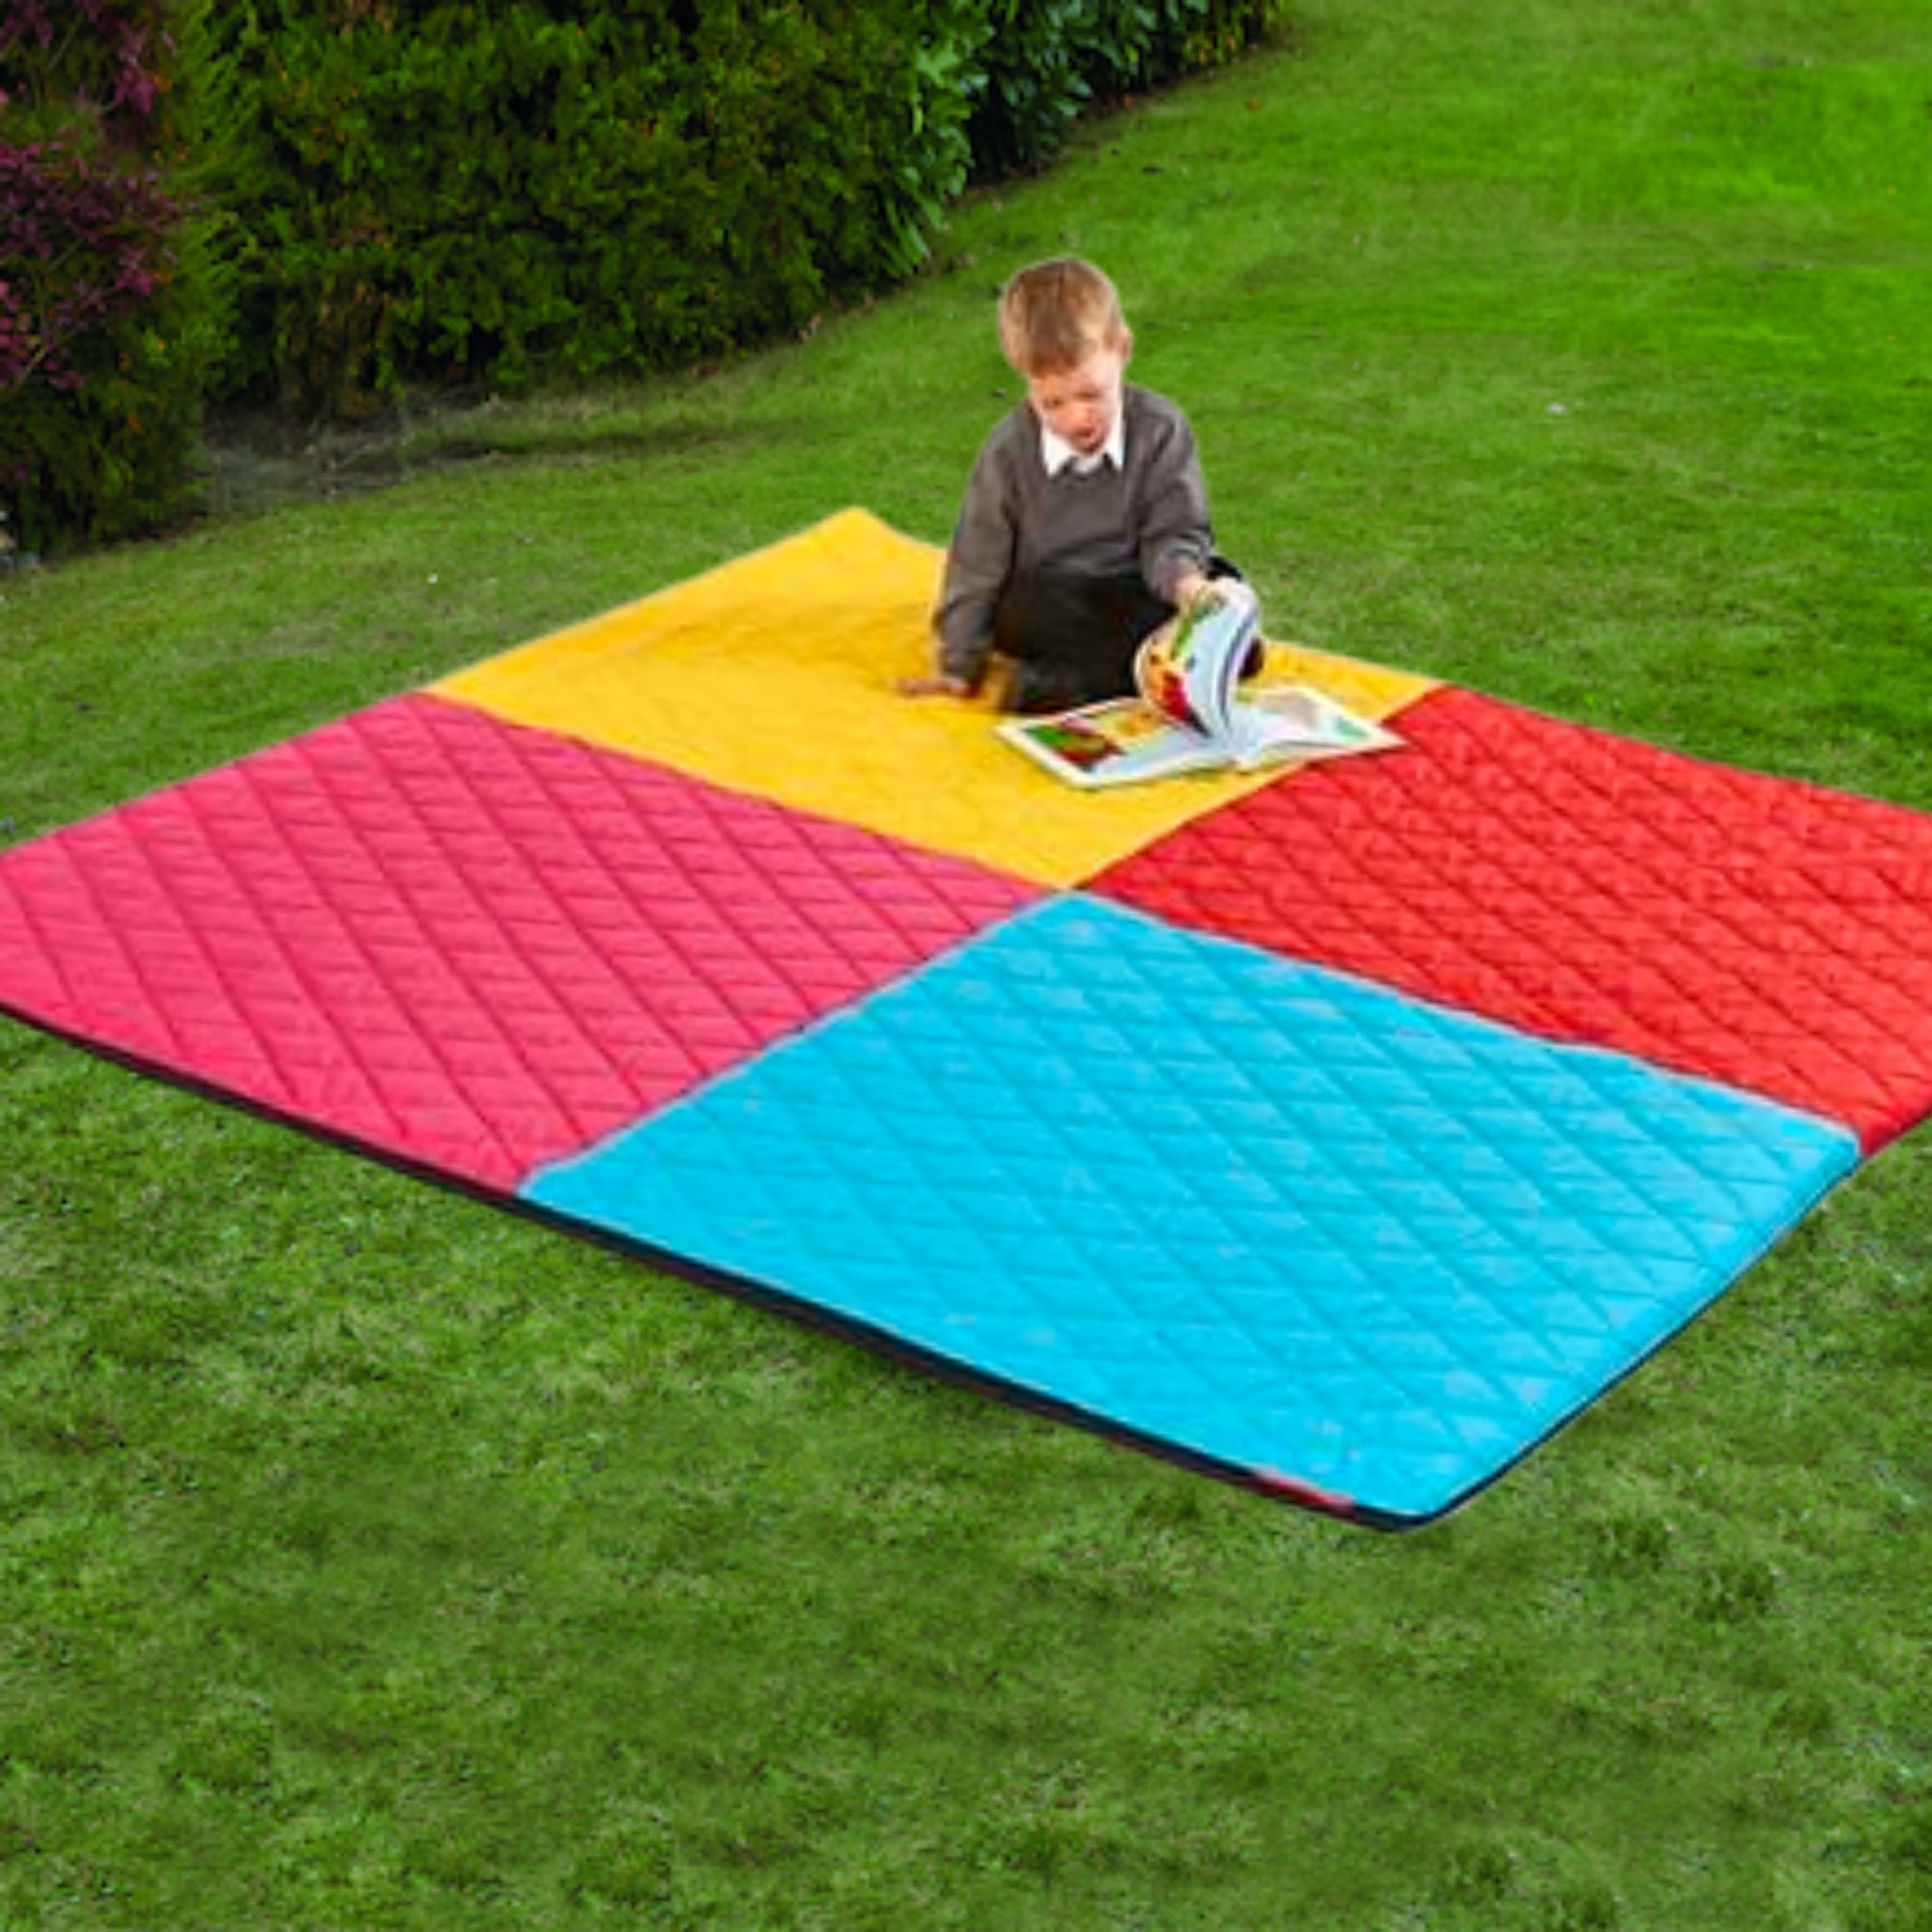 Indoor and Outdoor Large Quilted Harlequin Mat 2000 x 2000mm, This Large Quilted Harlequin Mat is large enough to seat the whole class. Features a vibrant harlequin design perfect for nurseries, pre school and early years environments. The mat is made of a high quality foam inner and covered in quilted polyester for extra comfort and durability. Can be used indoors and outdoors. This Large Quilted Harlequin Mat is large enough to seat the whole class. Features a vibrant harlequin design perfect for nurserie